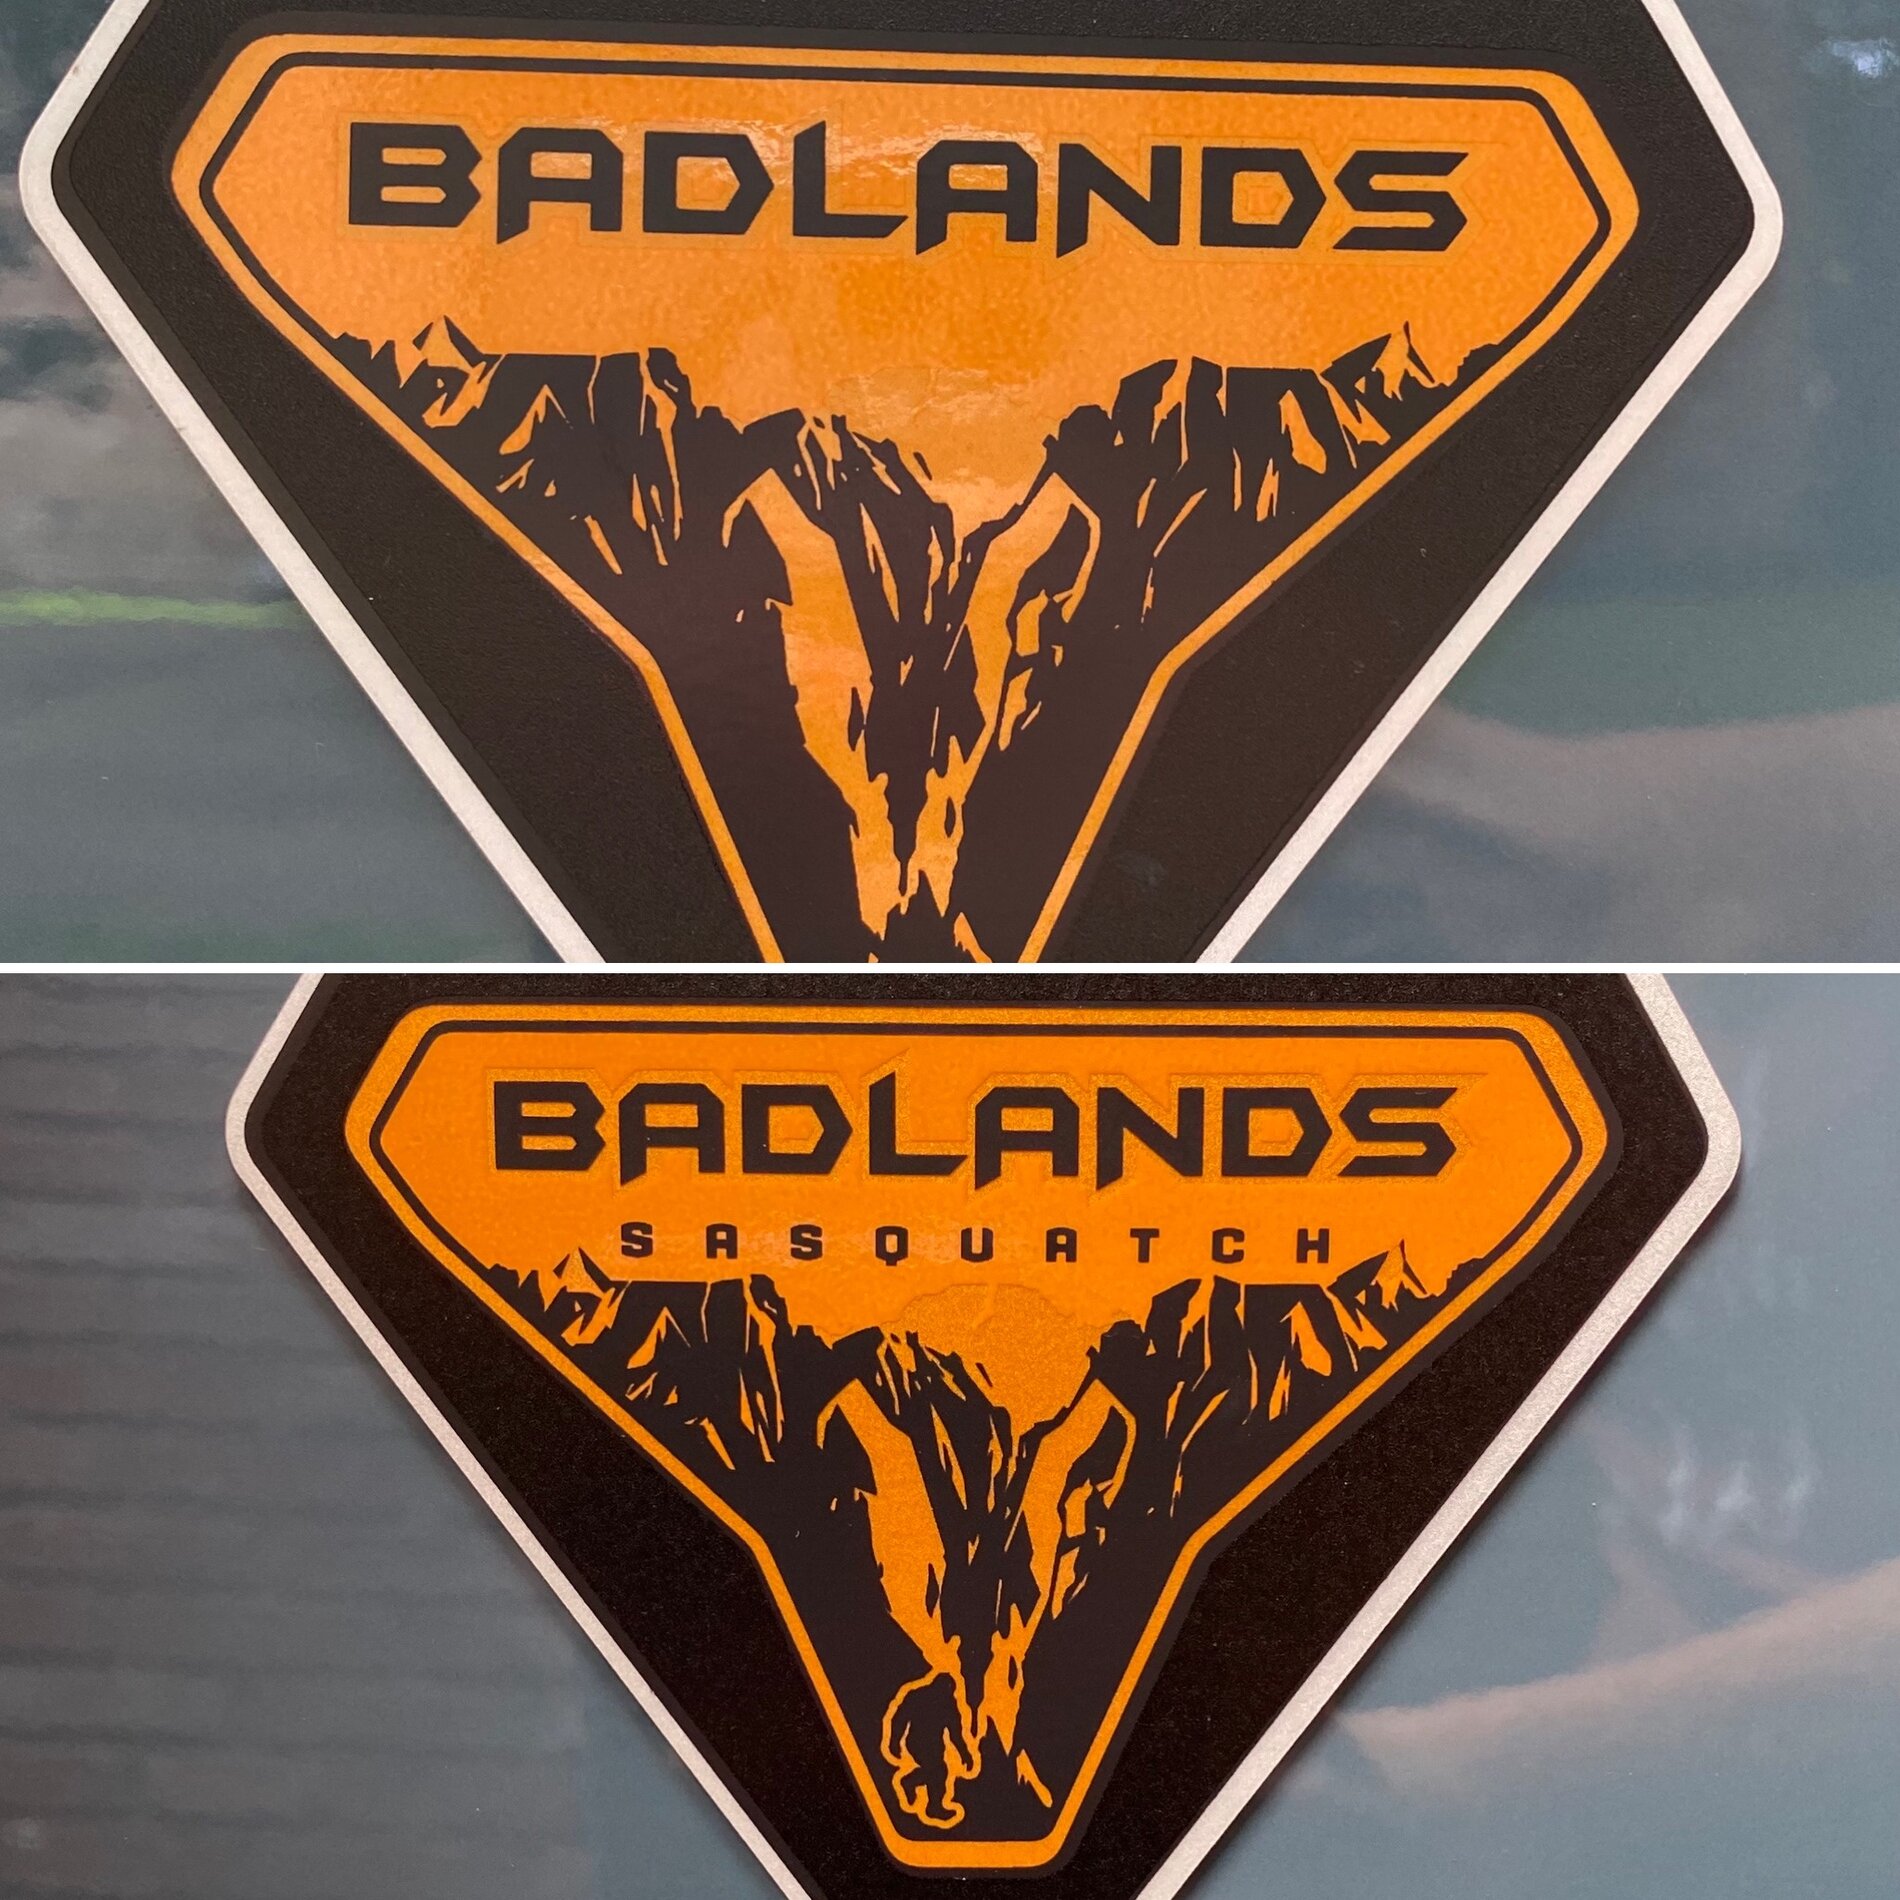 I have a Half-Squatch -- two different Badlands badges on my Bronco ...